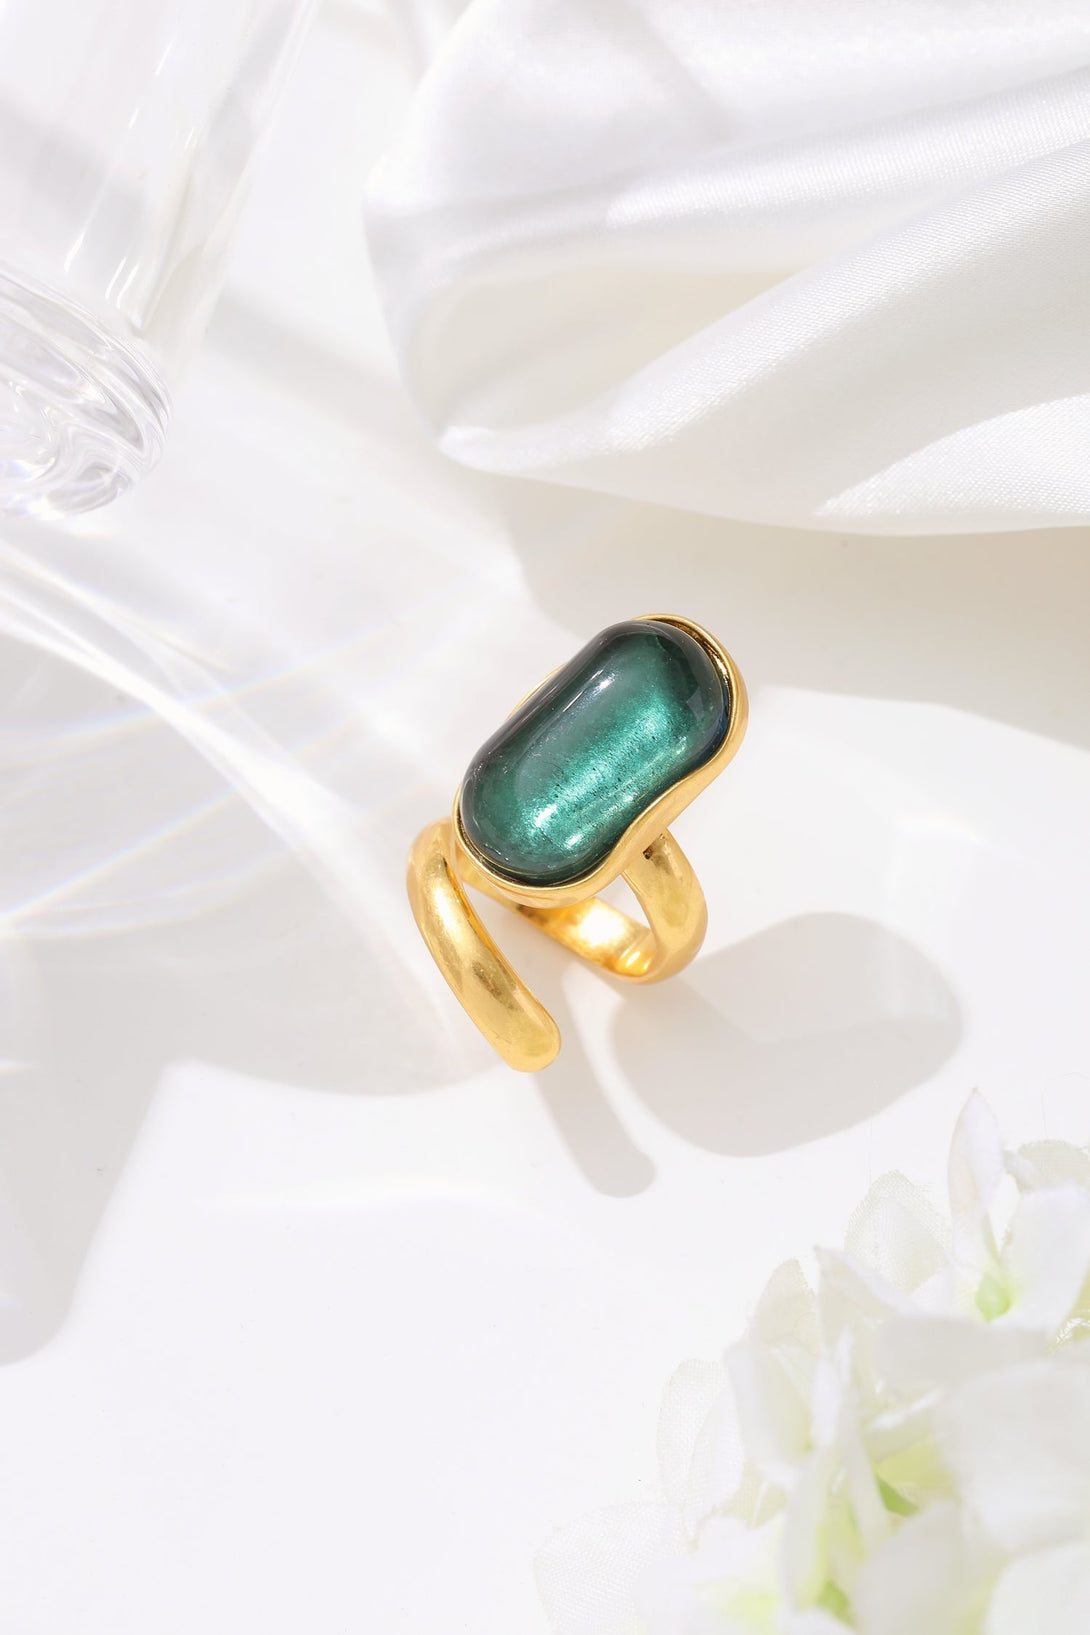 Vintage Inspired Emerald Green Cocktail Ring - Classicharms